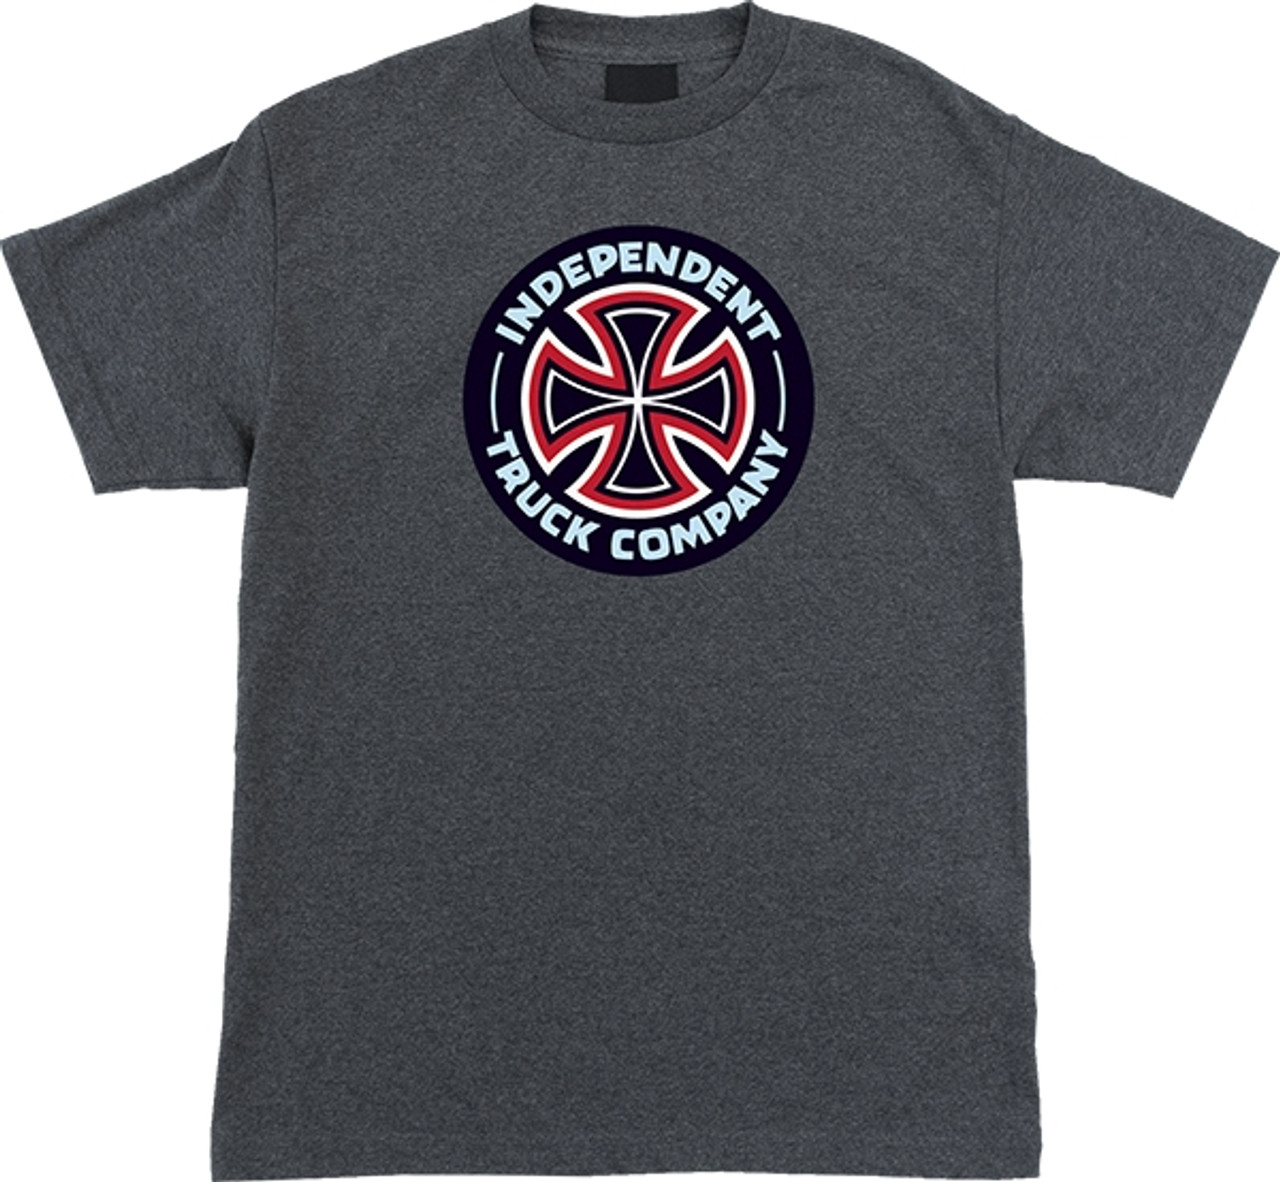 INDEPENDENT COMBO T/C YOUTH SS SMALL CHARCOAL HEATHER